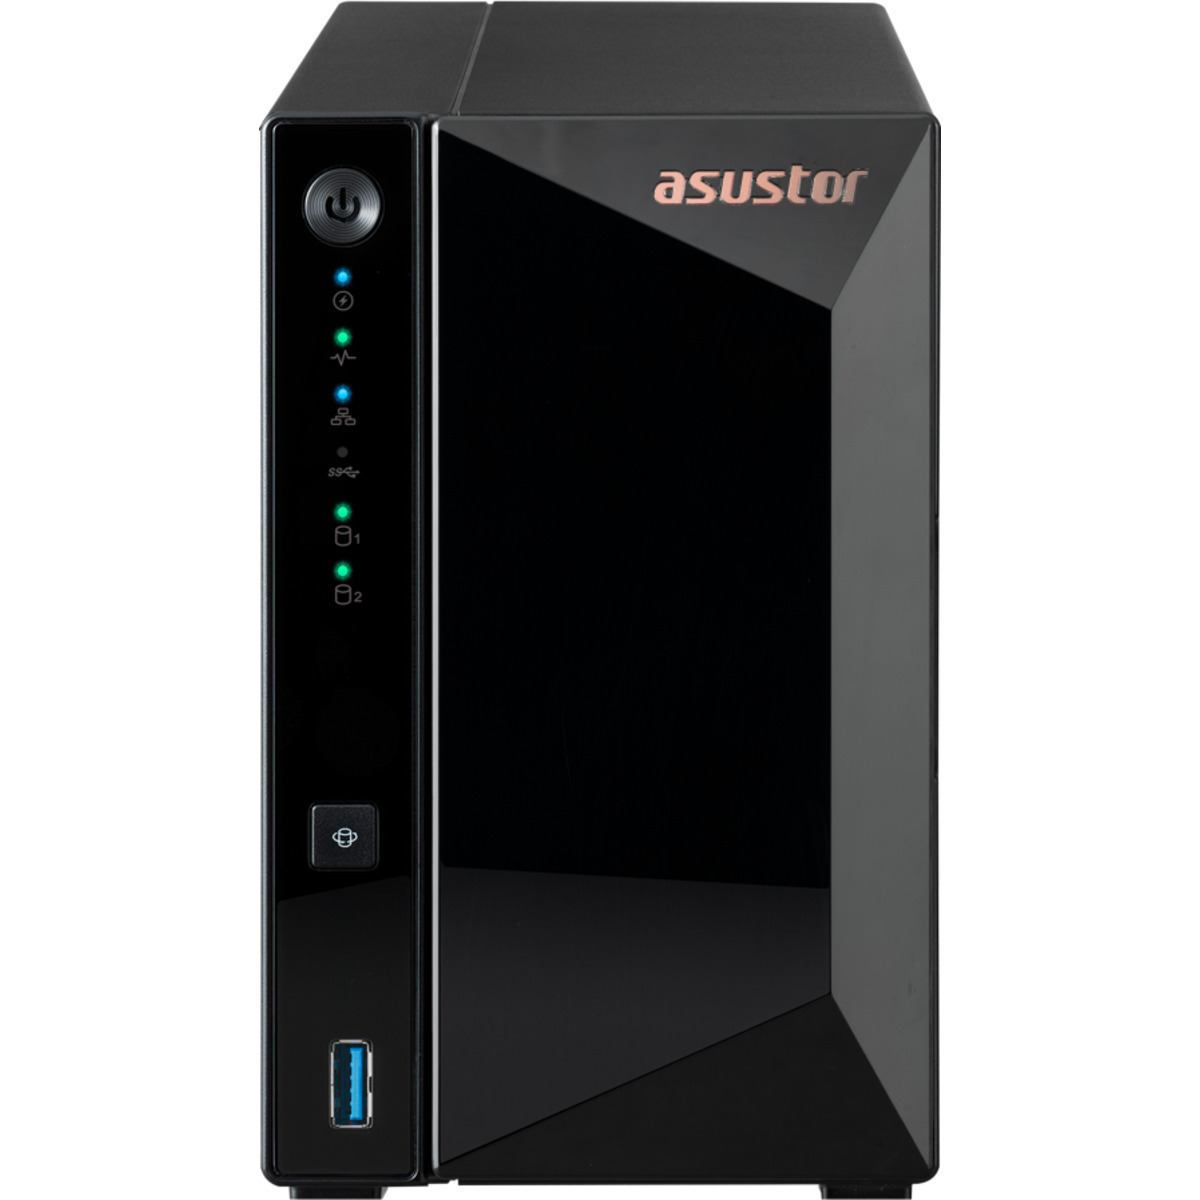 ASUSTOR DRIVESTOR 2 Pro Gen2 AS3302T v2 Desktop 2-Bay Personal / Basic Home / Small Office NAS - Network Attached Storage Device Burn-In Tested Configurations - ON SALE DRIVESTOR 2 Pro Gen2 AS3302T v2